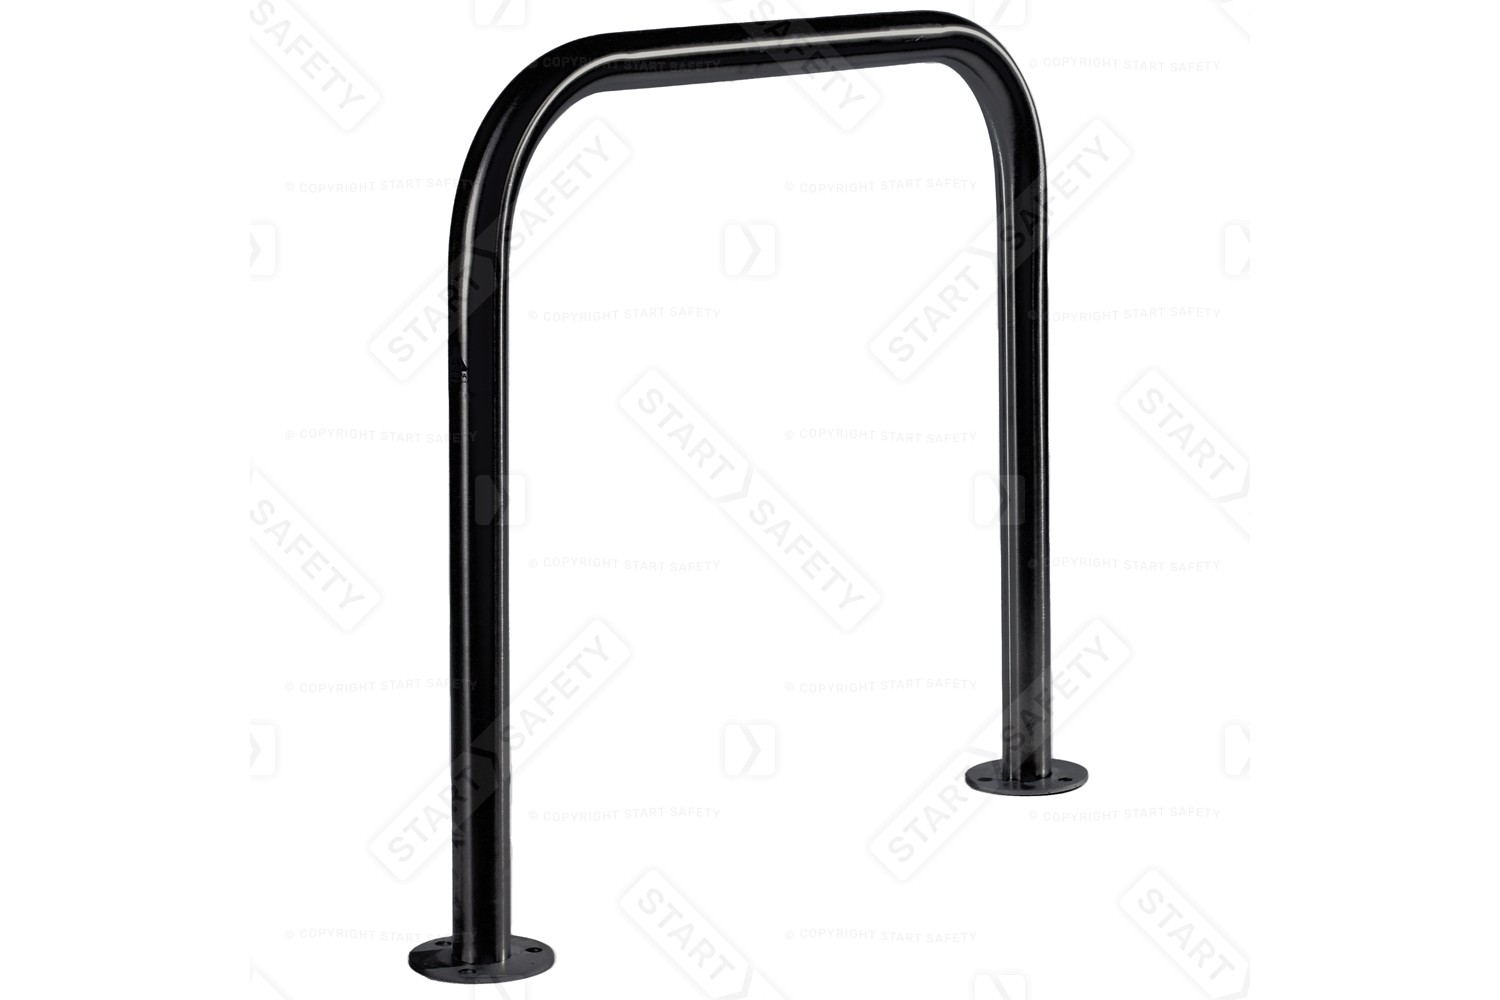 Poweder Coated Black and Galvanised Autopa Cycle Stand